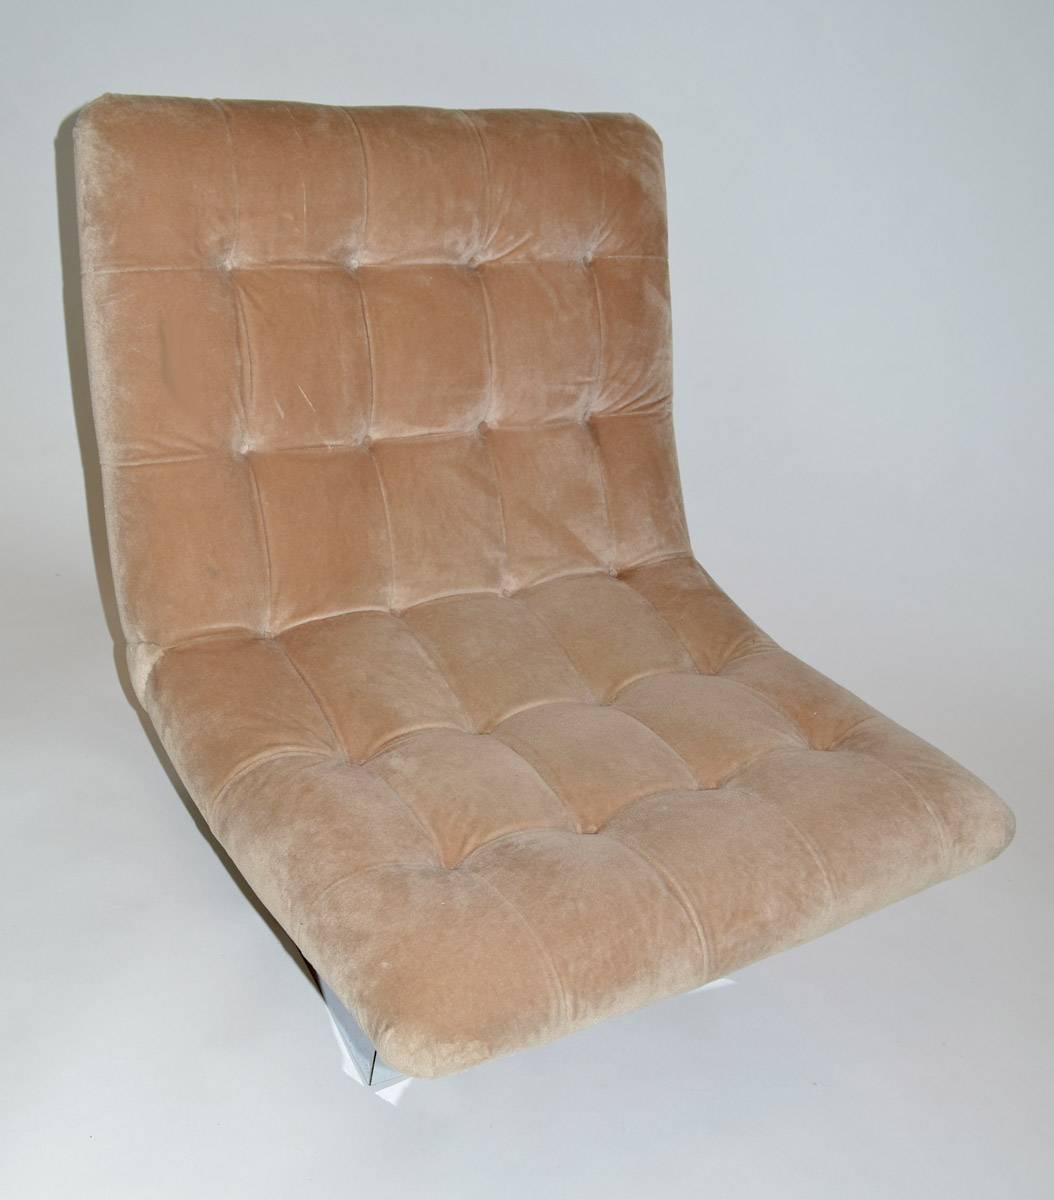 Milo Baughman Mohair scoop lounge chair for Thayer Coggin, 1980. Original camel-colored tufted mohair upholstery over floating mirrored laminate wood base. Labeled, 1980s.